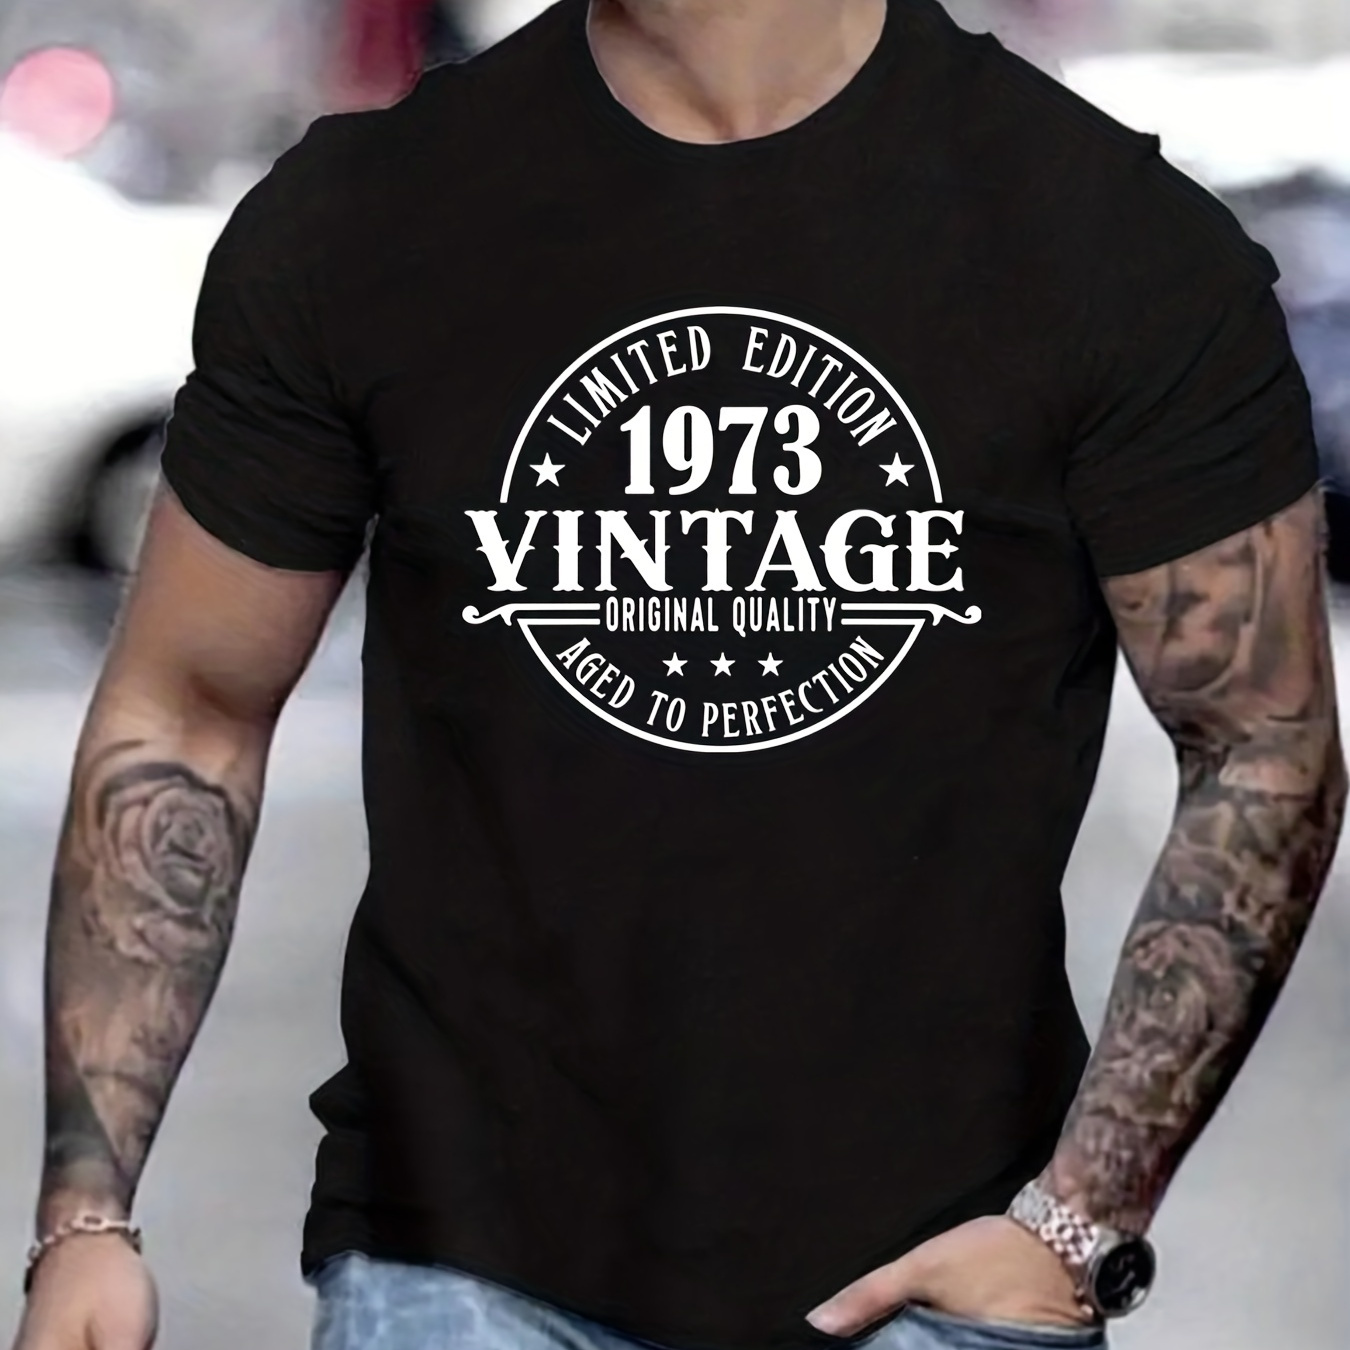 

'vintage' Print T Shirt, Tees For Men, Casual Short Sleeve Tshirt For Summer Spring Fall, Tops As Gifts